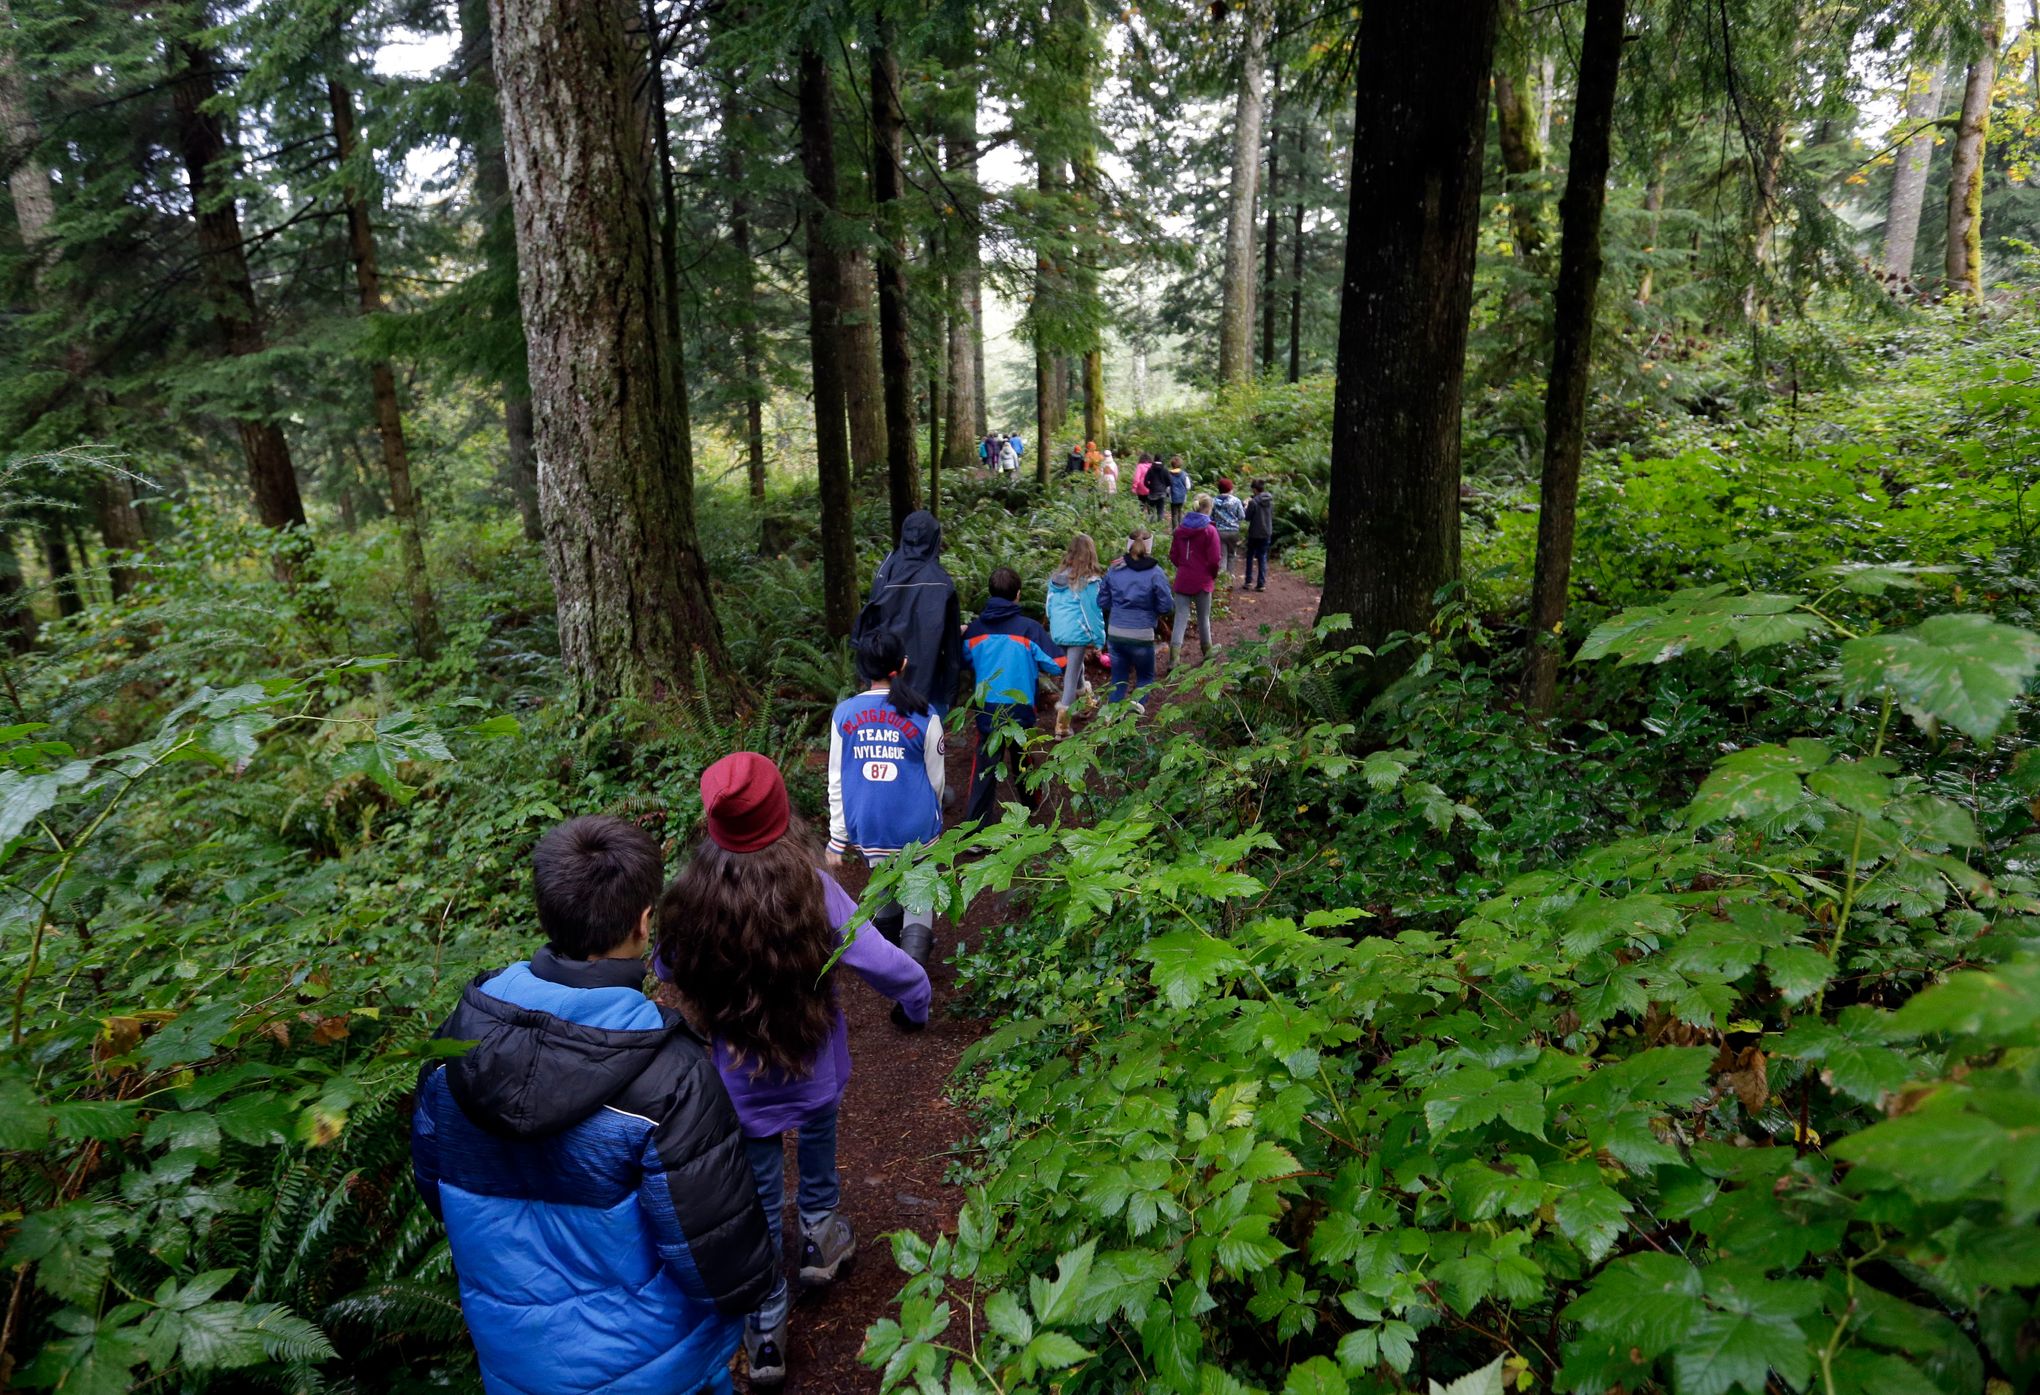 Oregon weighs whether all kids should get outdoor education